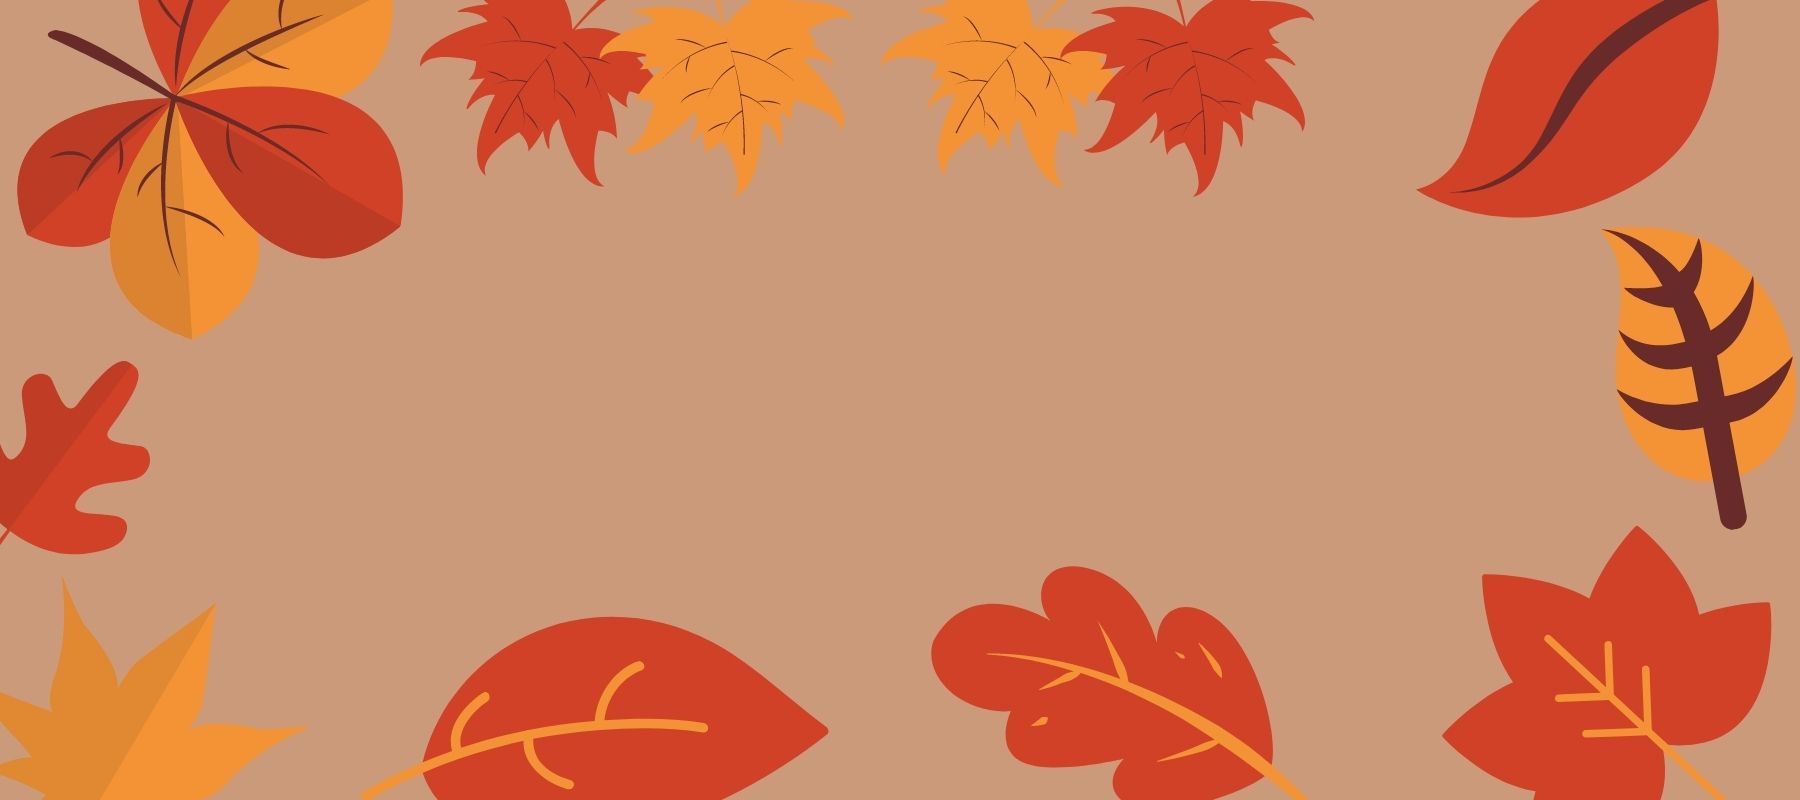 Myntz! Breathmints Fall Background With Autumn Leaves